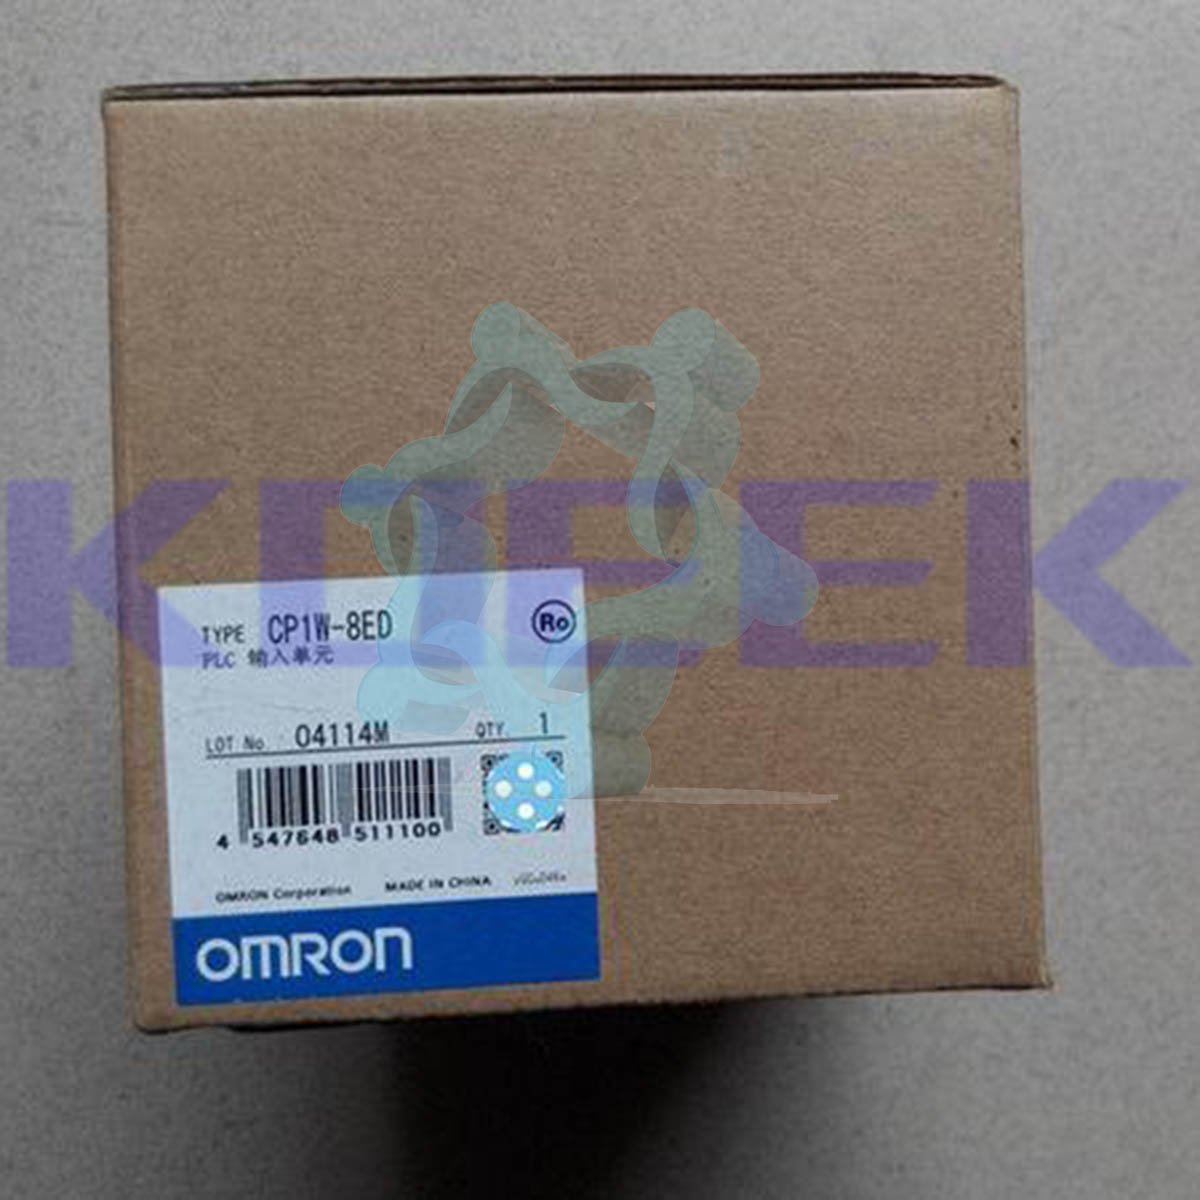 CP1W-8ED KOEED 101-200, 80%, import_2020_10_10_031751, Omron, Other